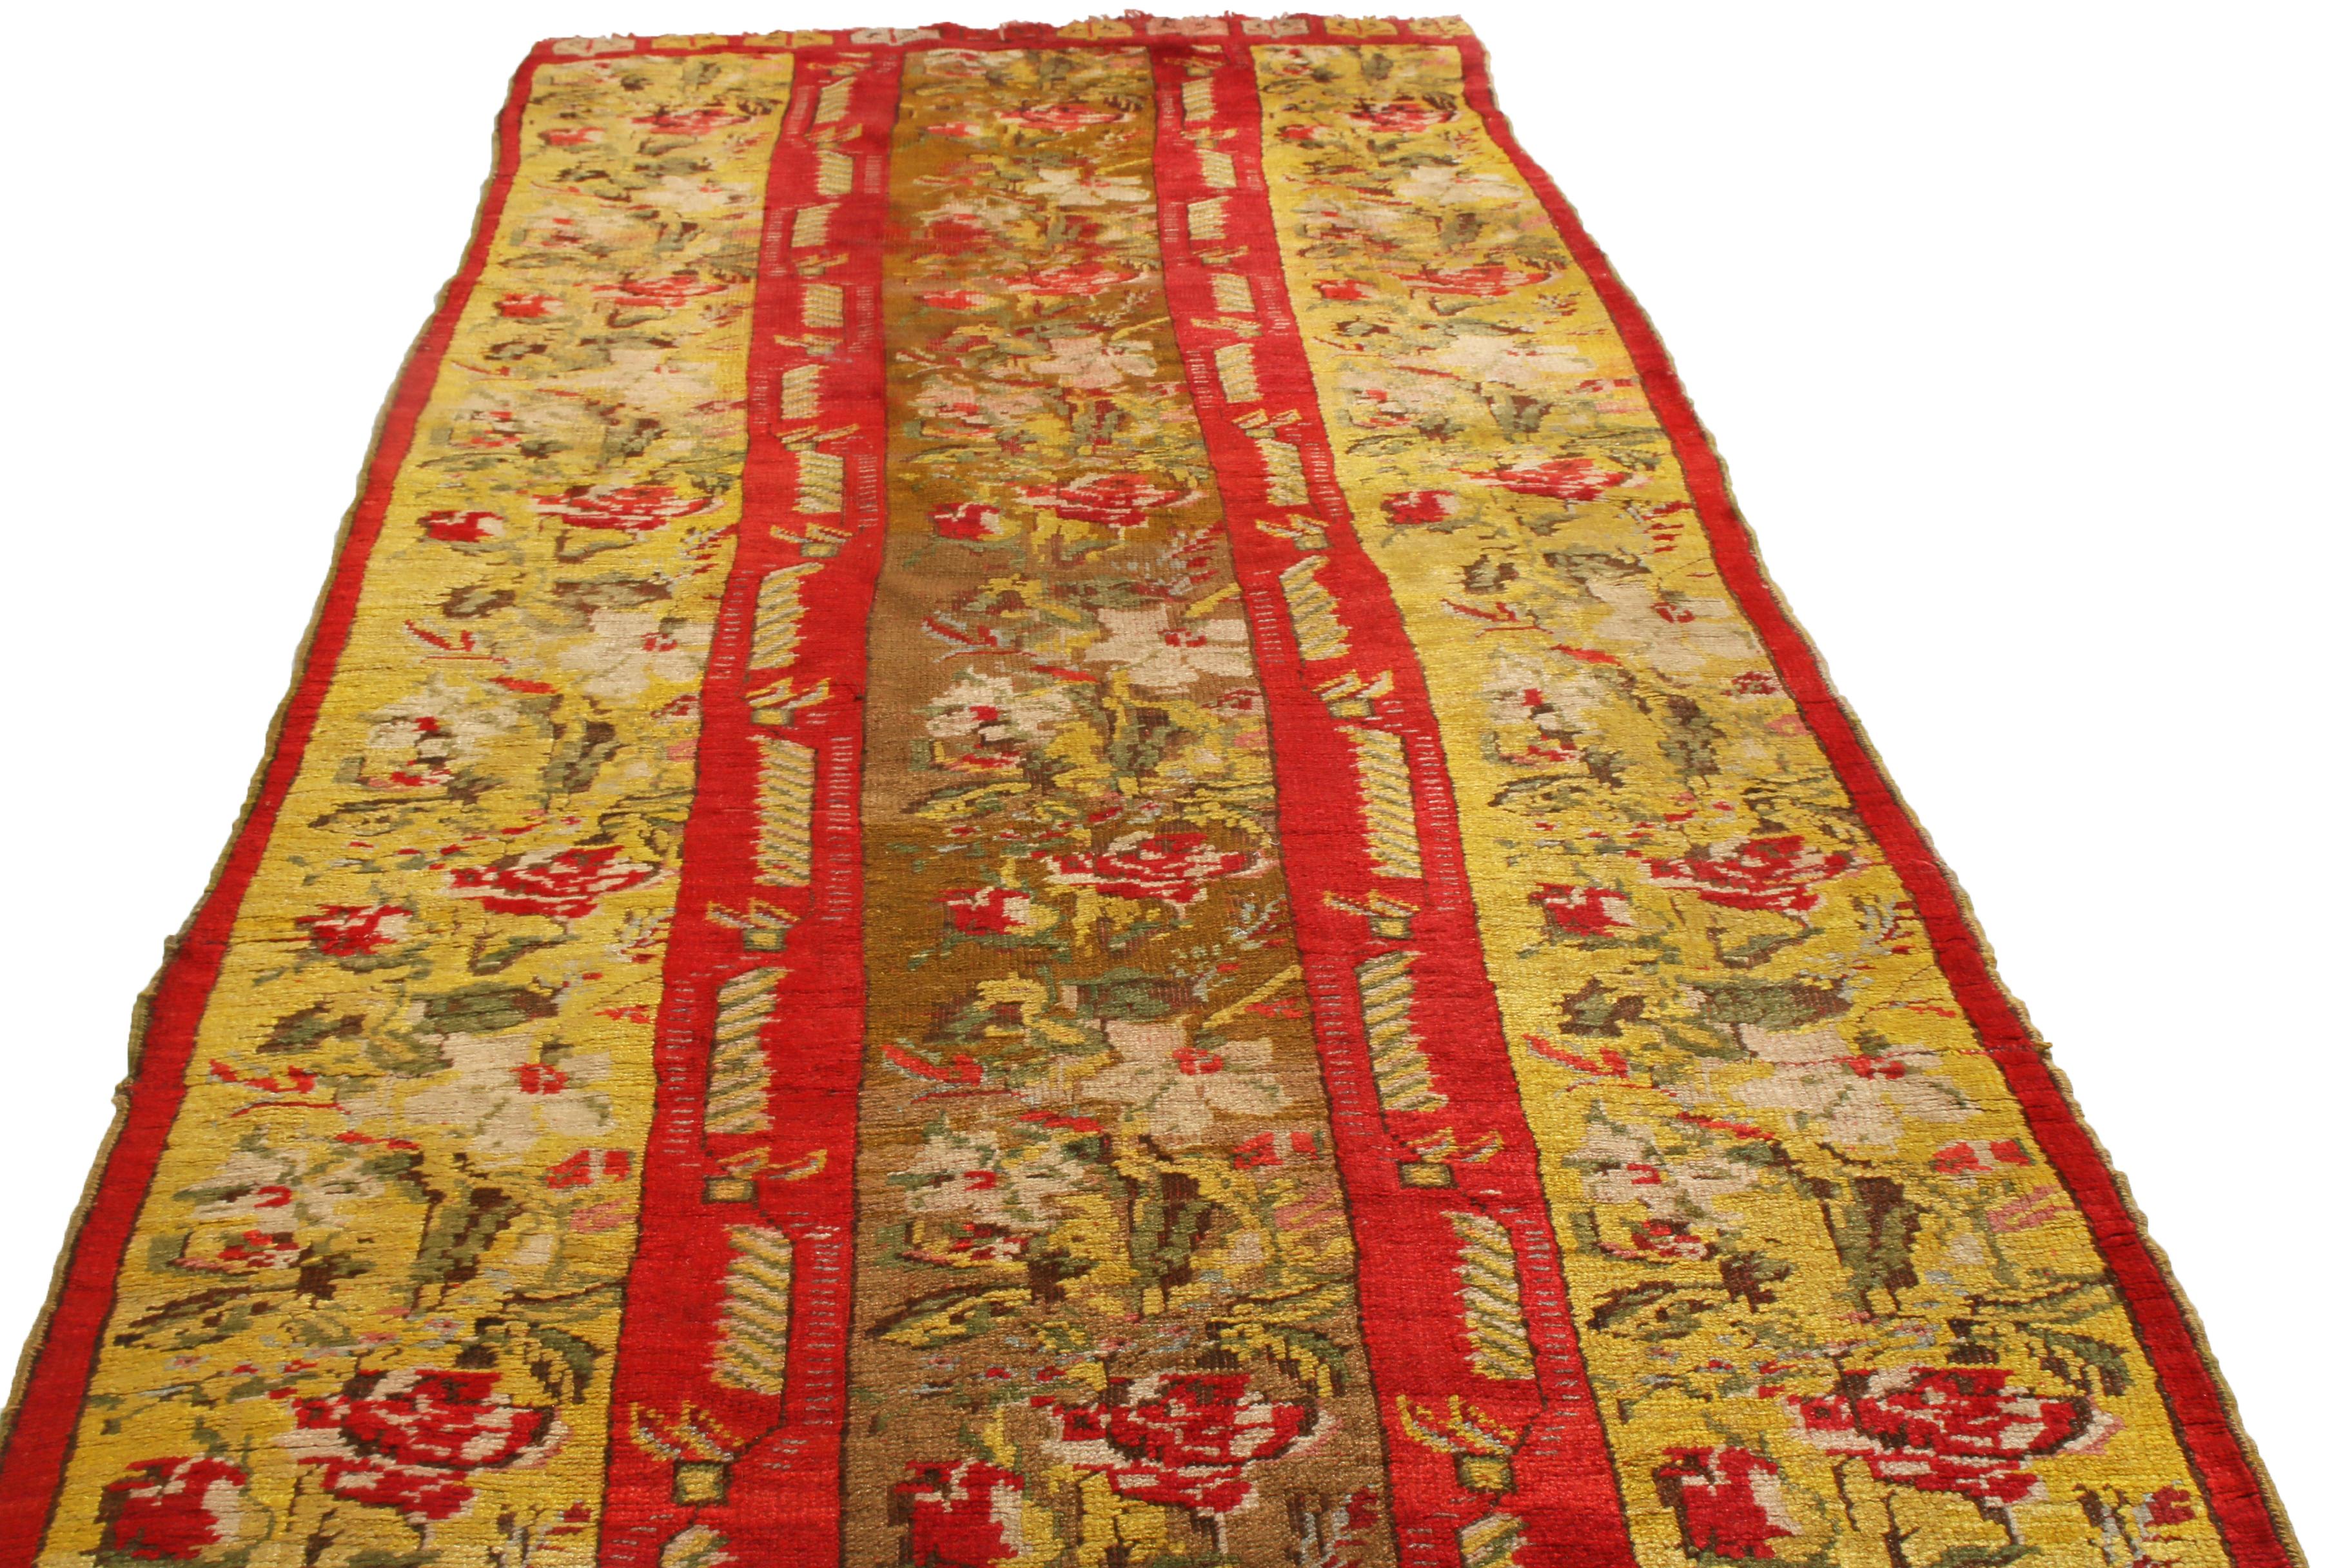 Originating from Turkey in 1910, this antique Kirsehir runner is hand-knotted in luminous, quality wool wile with a distinguished three-column field design among its kind. The all-over field design enjoys both rich and earthen red, golden-yellow,